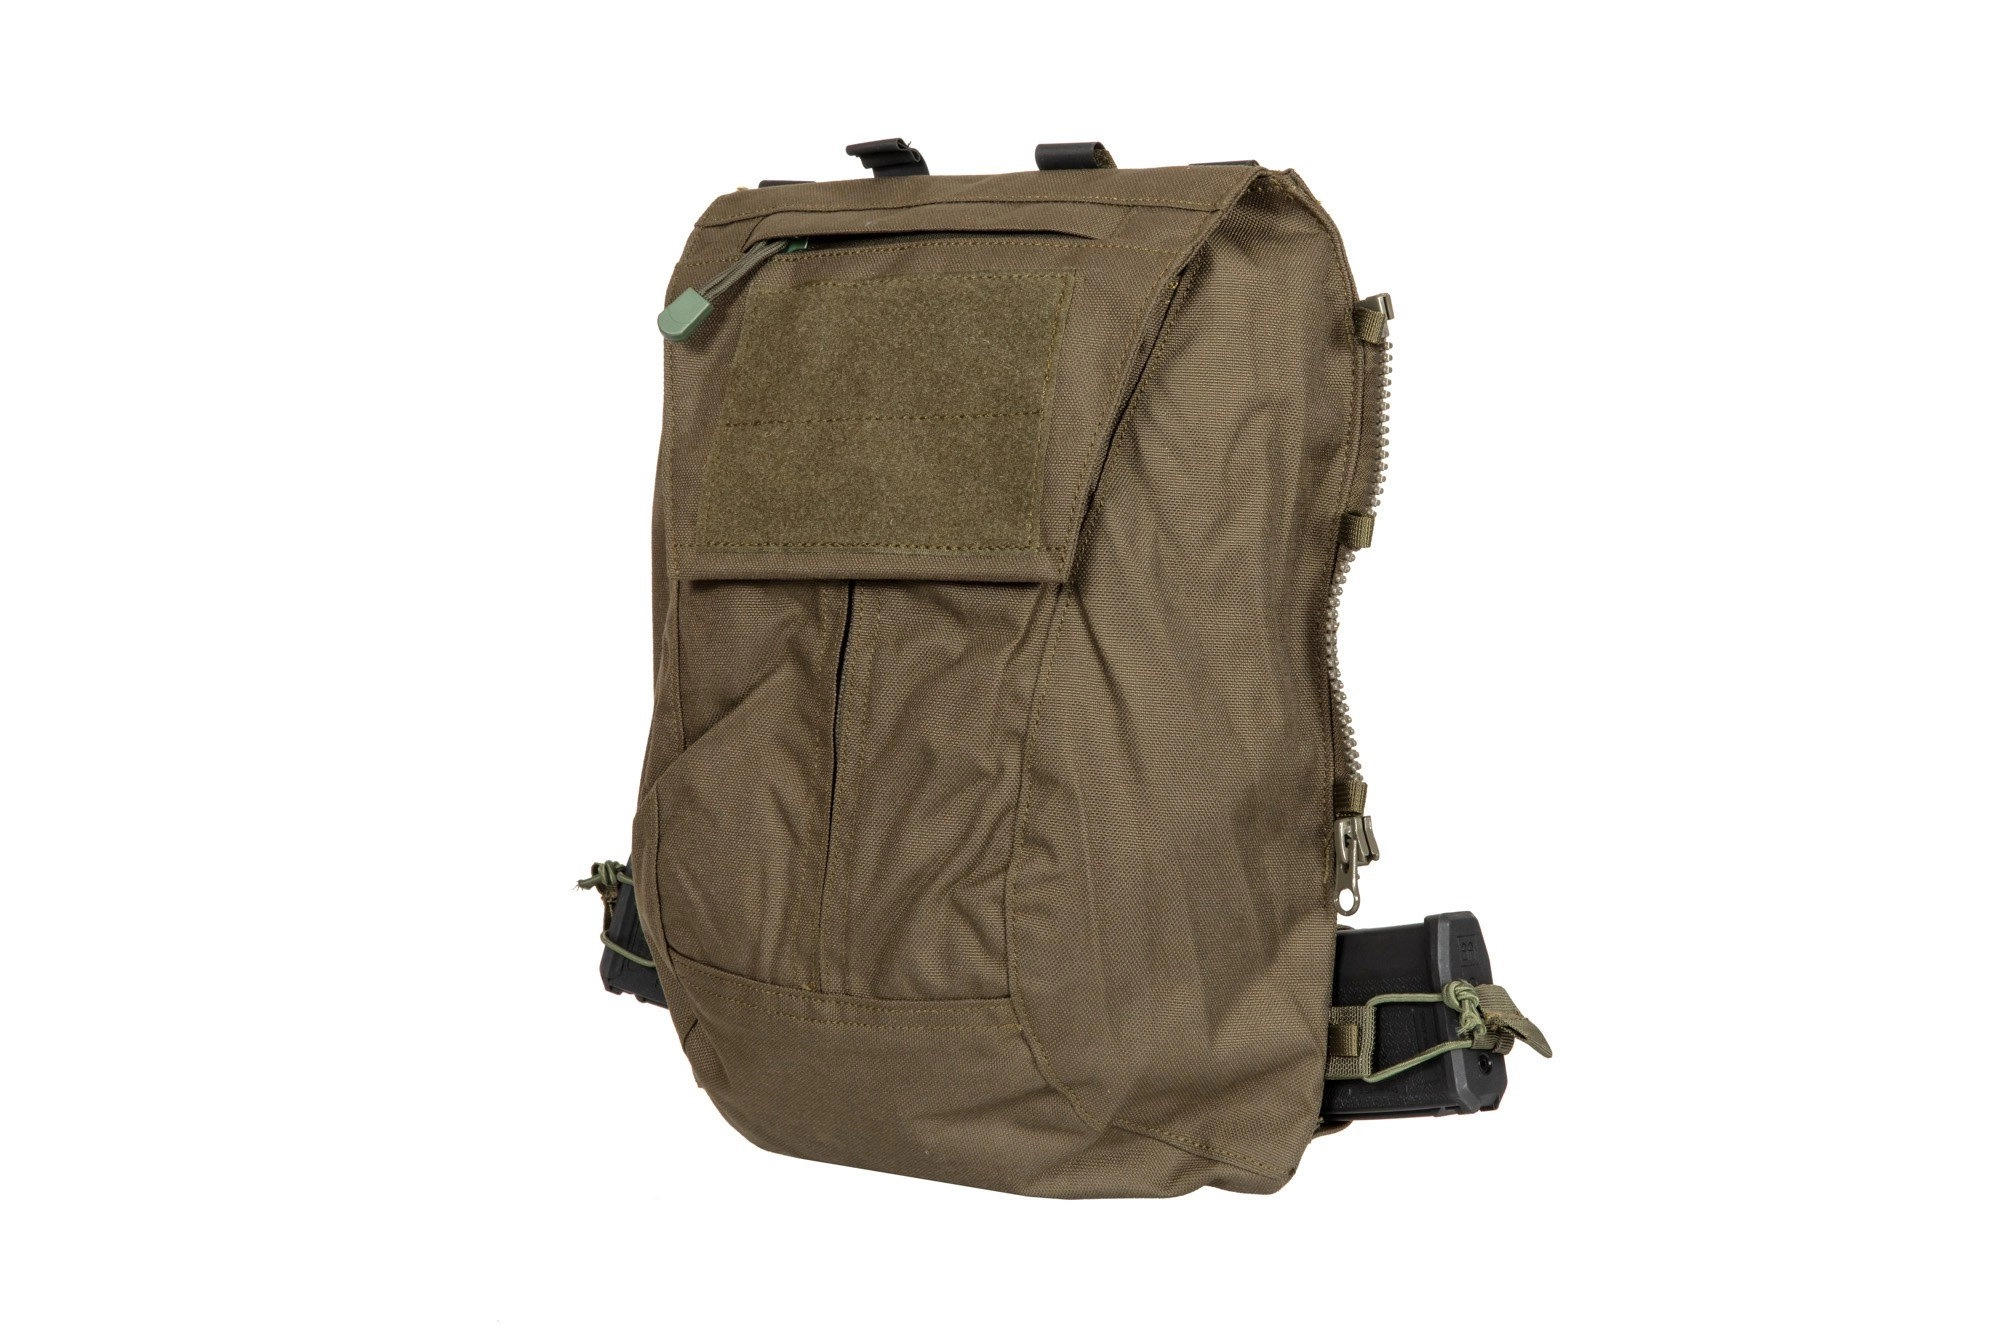 Tactical Backpack for Rush 2.0 Tactical Vest – Olive Drab